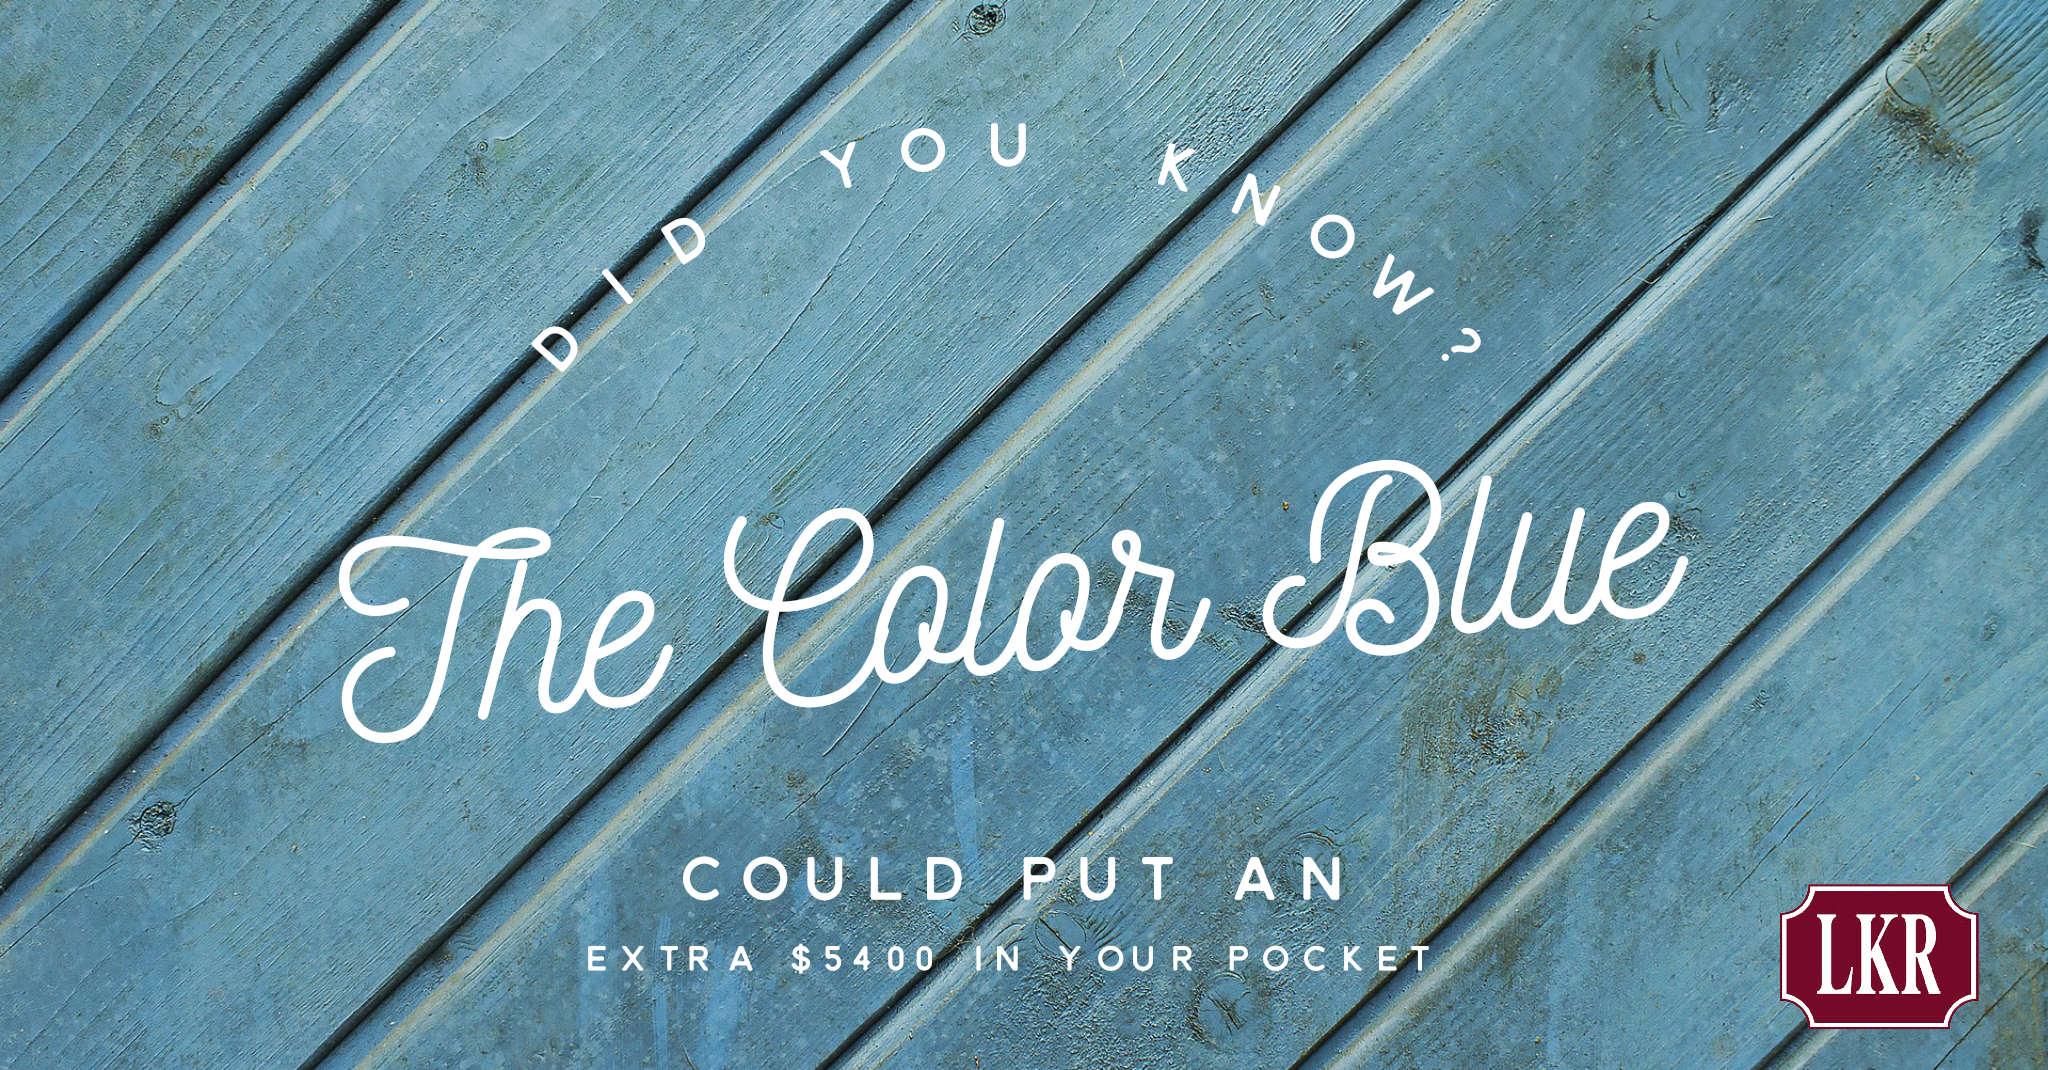 Color Matters! The Easiest $5,400 You'll Ever Make